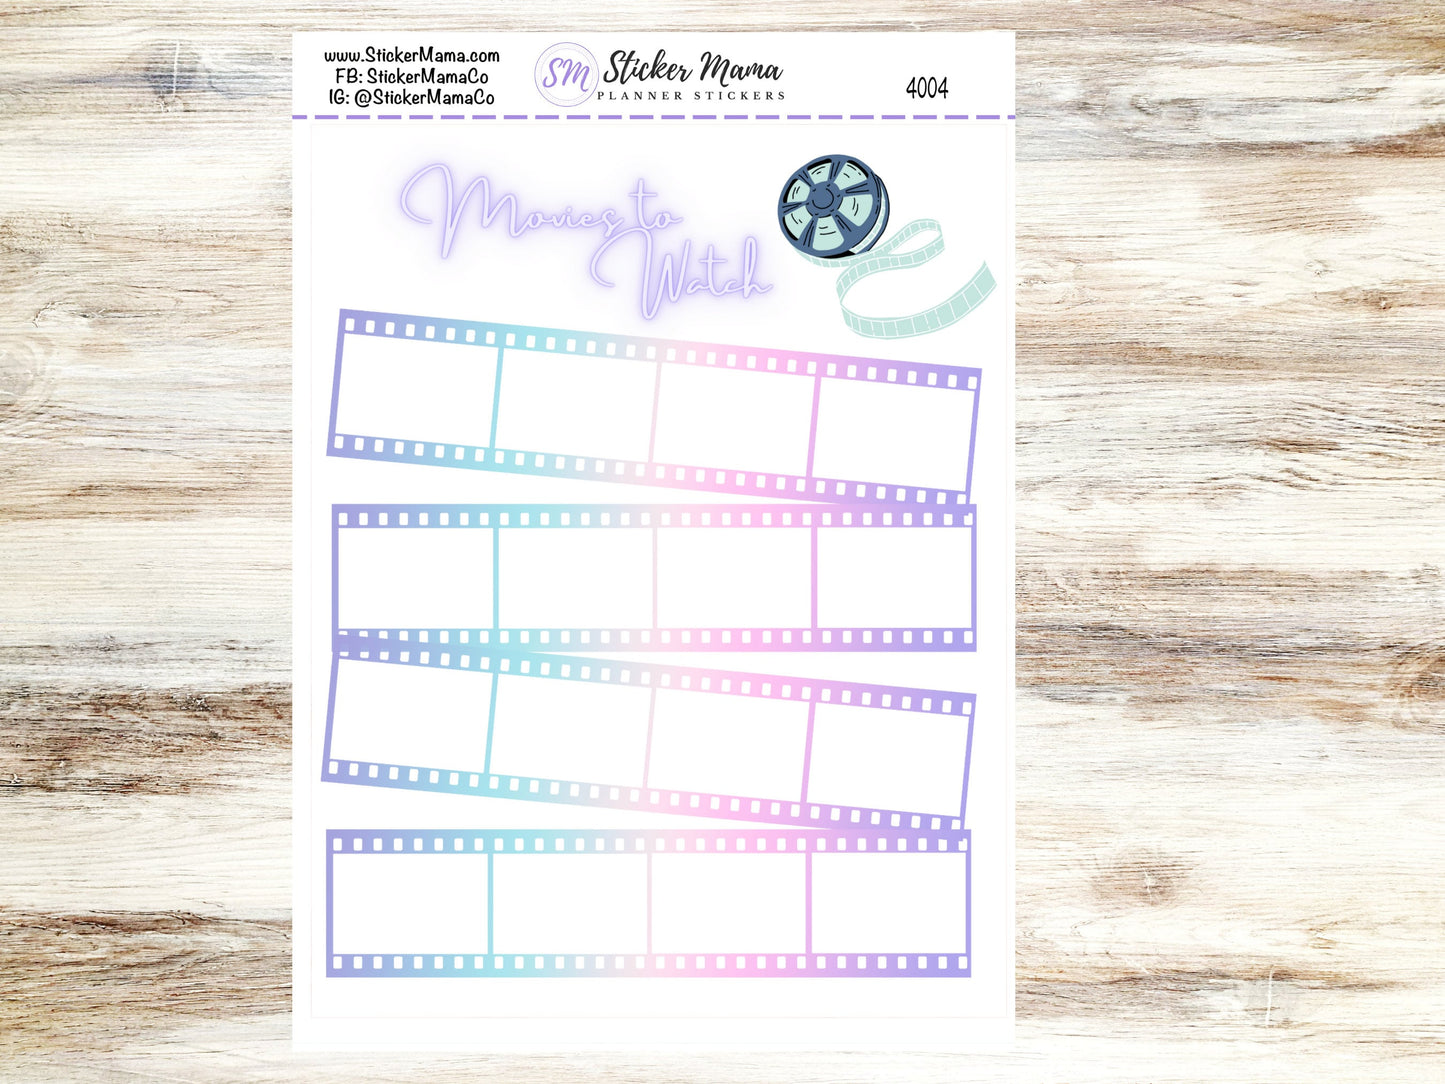 MOVIE TRACKER 4004 - A5 or 7x9 Movie Planner Stickers - Movie Tracker Sticker - Movie Log Sticker